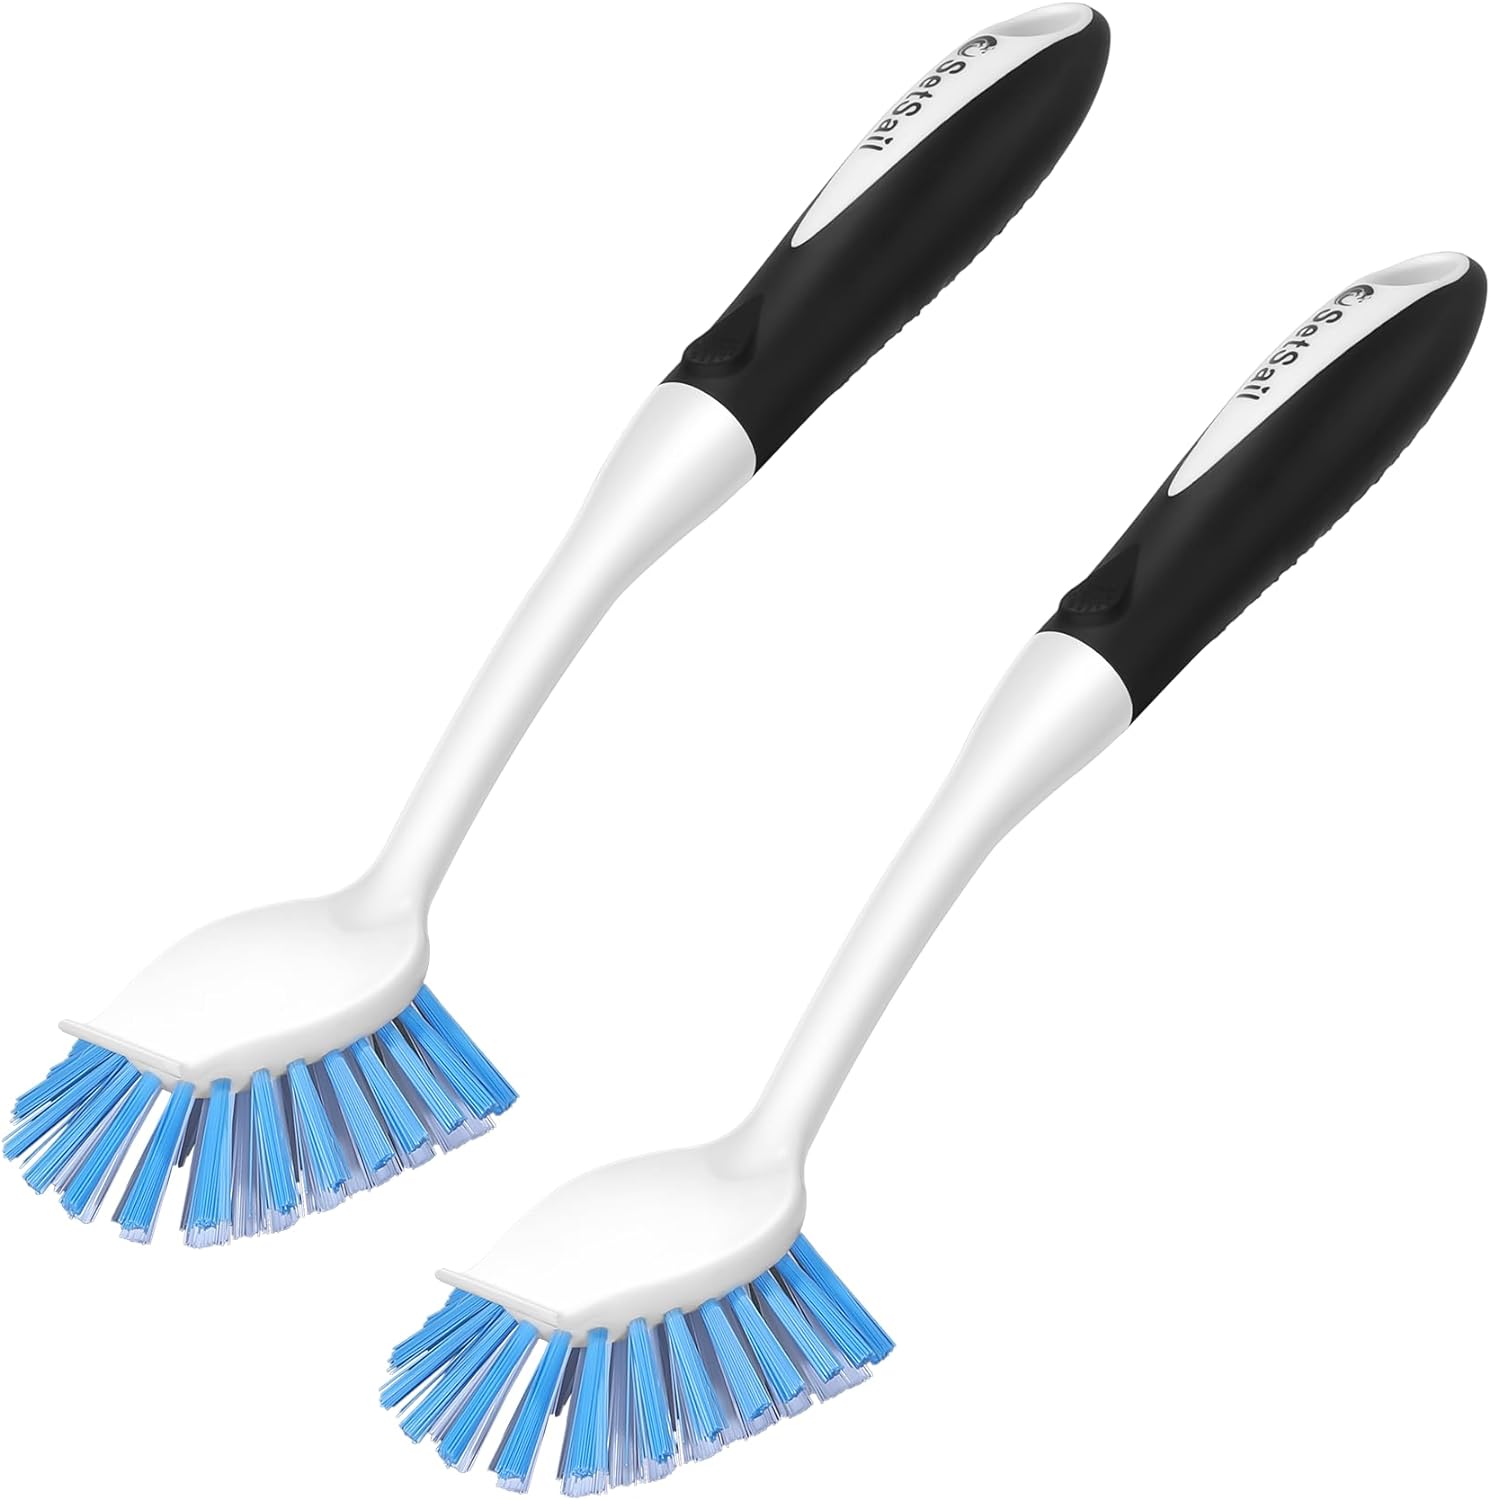 SetSail Dish Brush with Handle, 2 Pack Stiff Bristles Dish Scrubber with Built-in Scraper Dish Scrub Brushes for Cleaning Dishes, Pots and Pans, Kitchen Sink